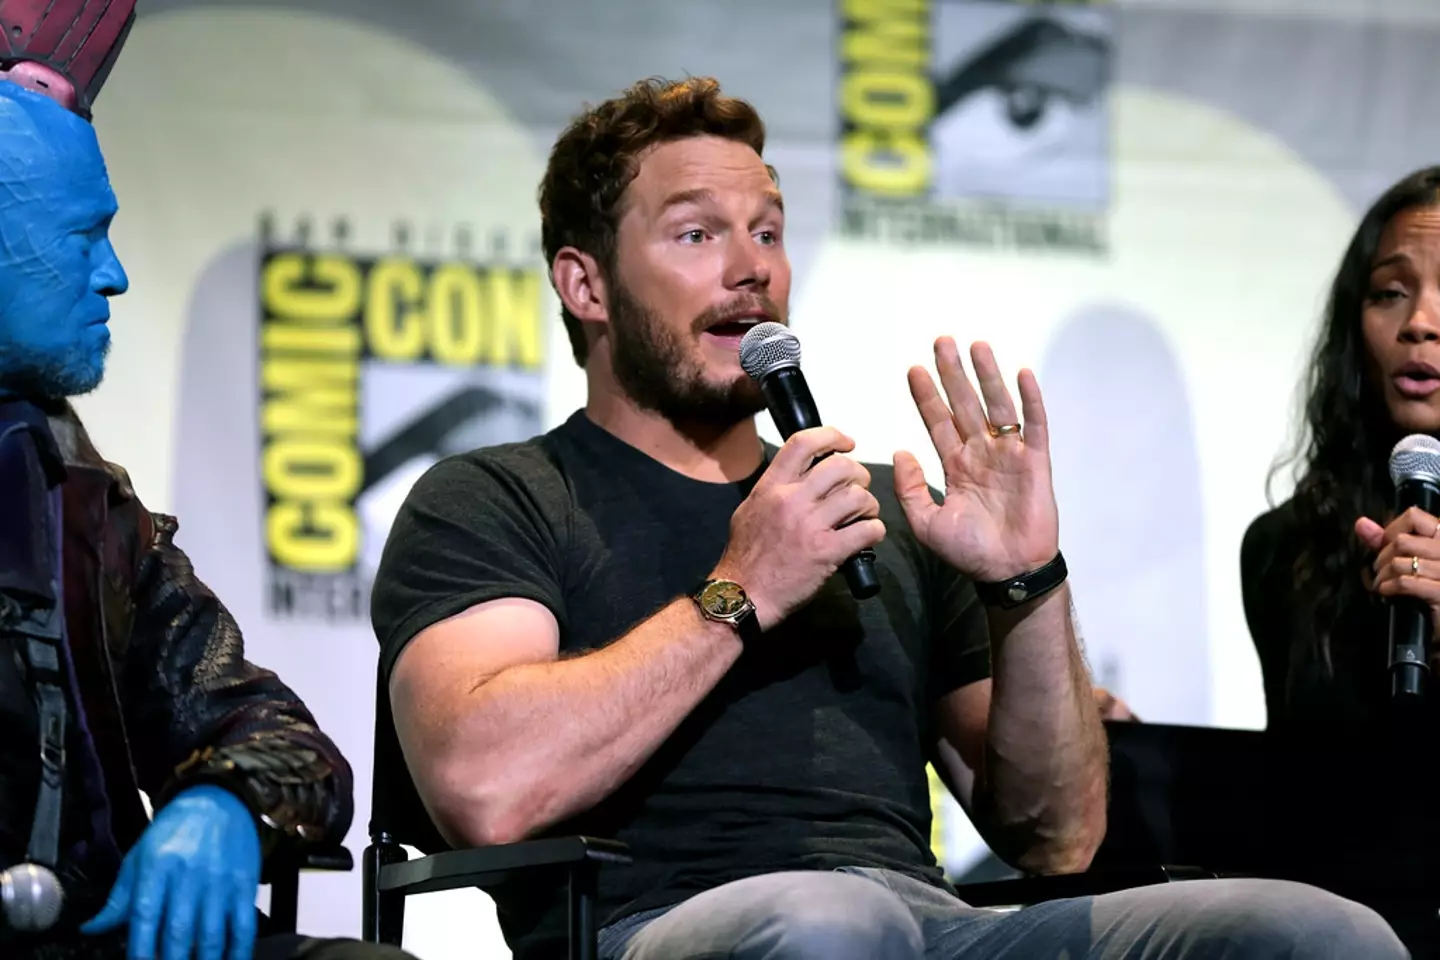 Chris Pratt has said he doesn't like to be called Chris by his pals.